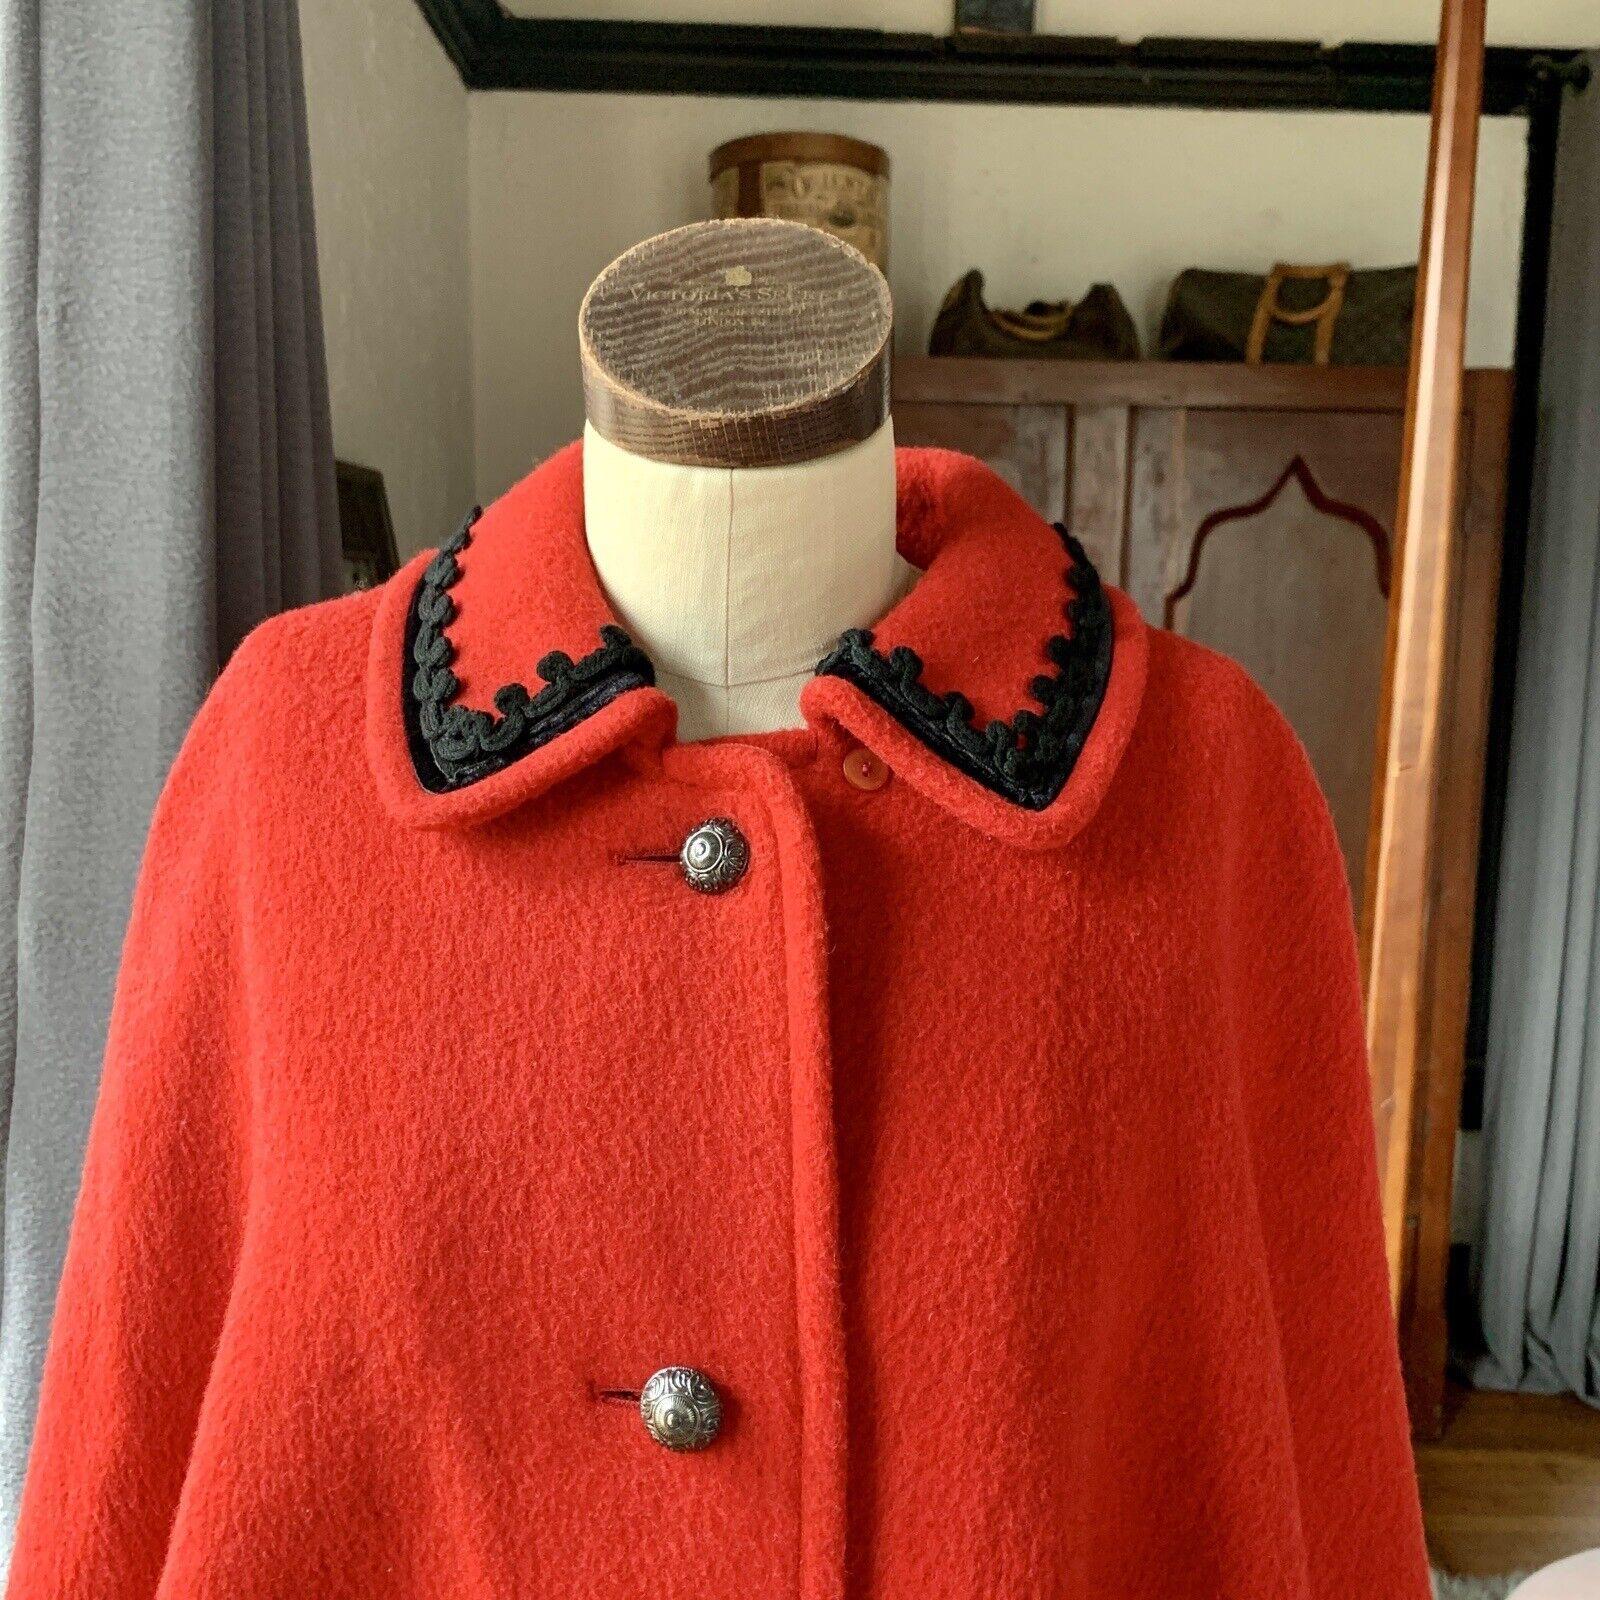 Logan Germany Cape, Wool Blend, Four Metal Buttons, Two Pockets (One Unopened), Velvet Trim on Bottom and Around Collar, Fully Lined, Size 40, Fun Vintage Label with Mountain Goat

Measurements Laying Flat

Length 31